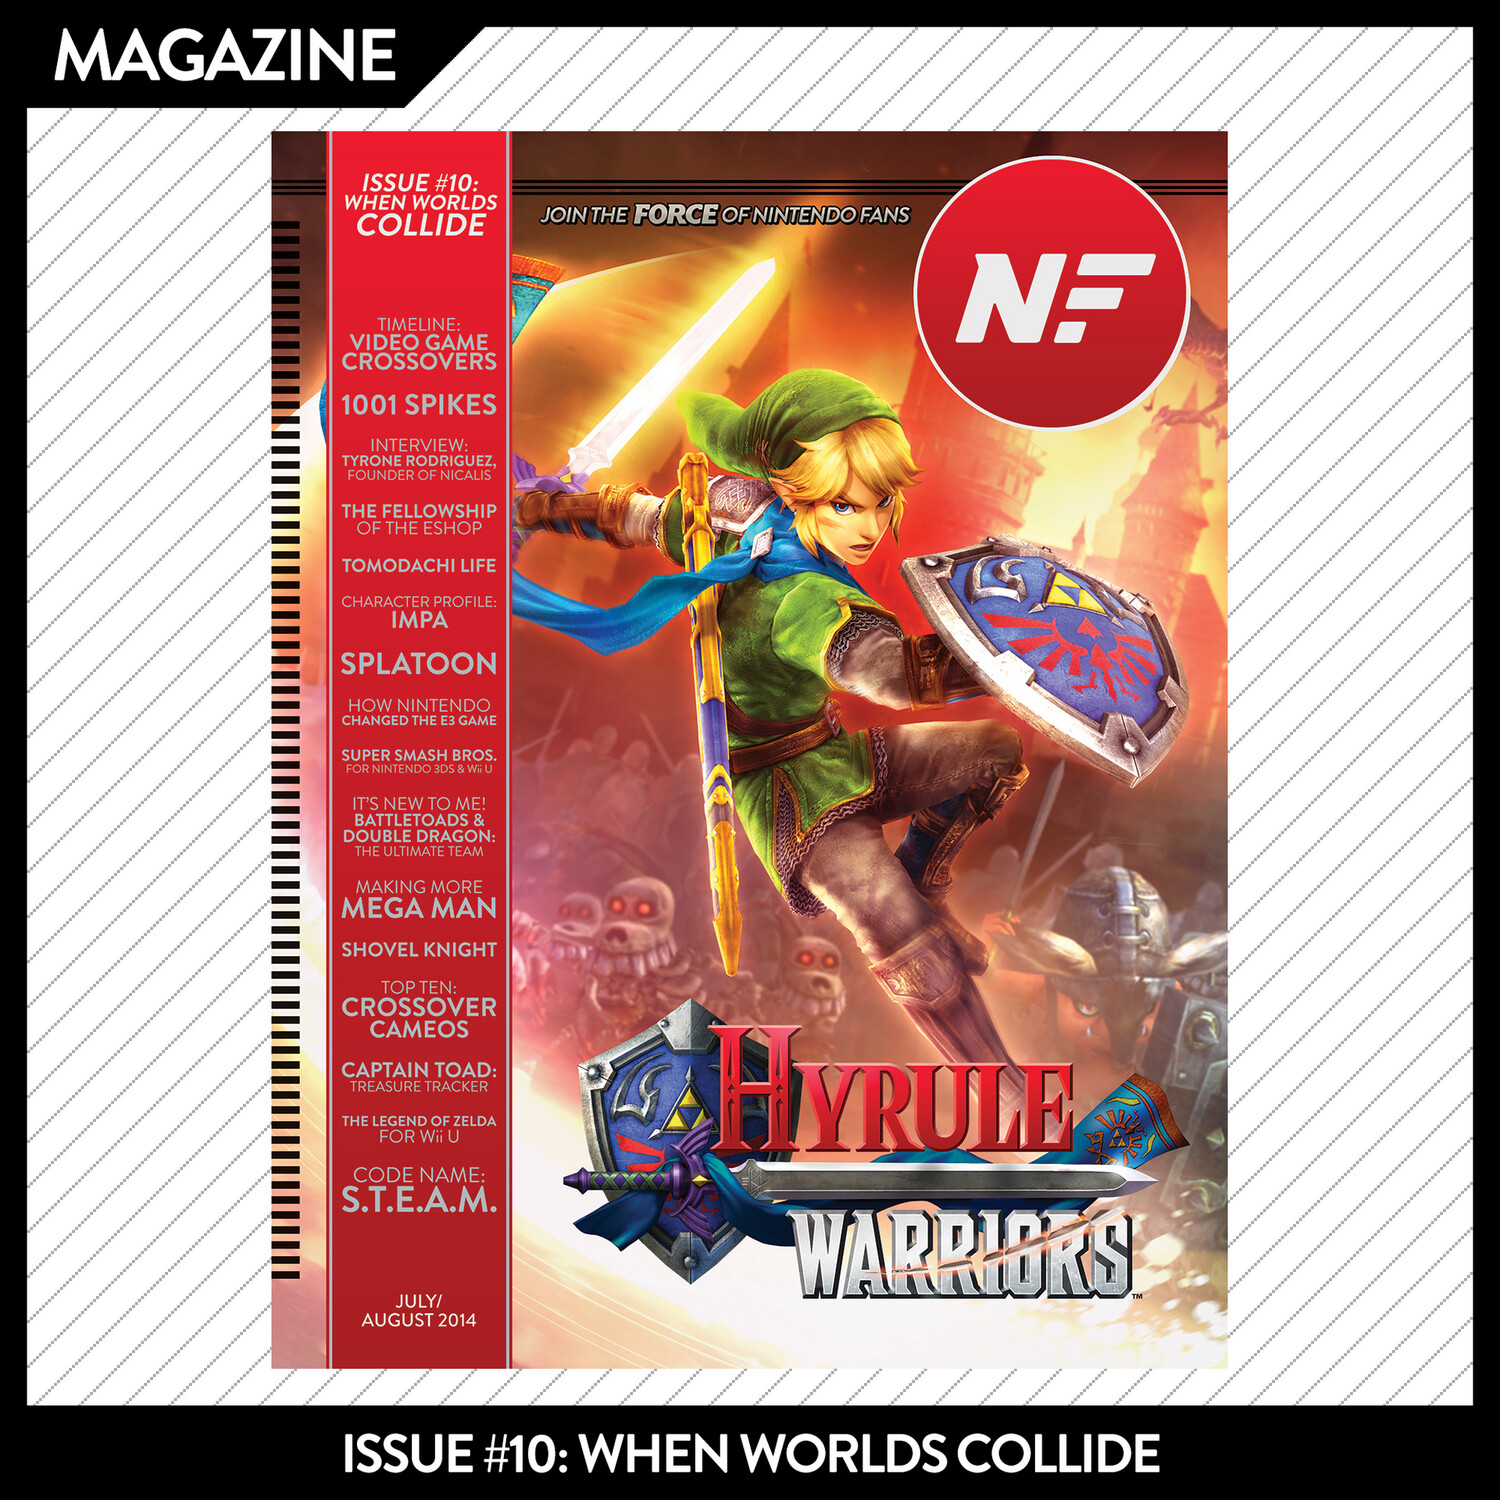 Issue #10: When Worlds Collide – July/August 2014